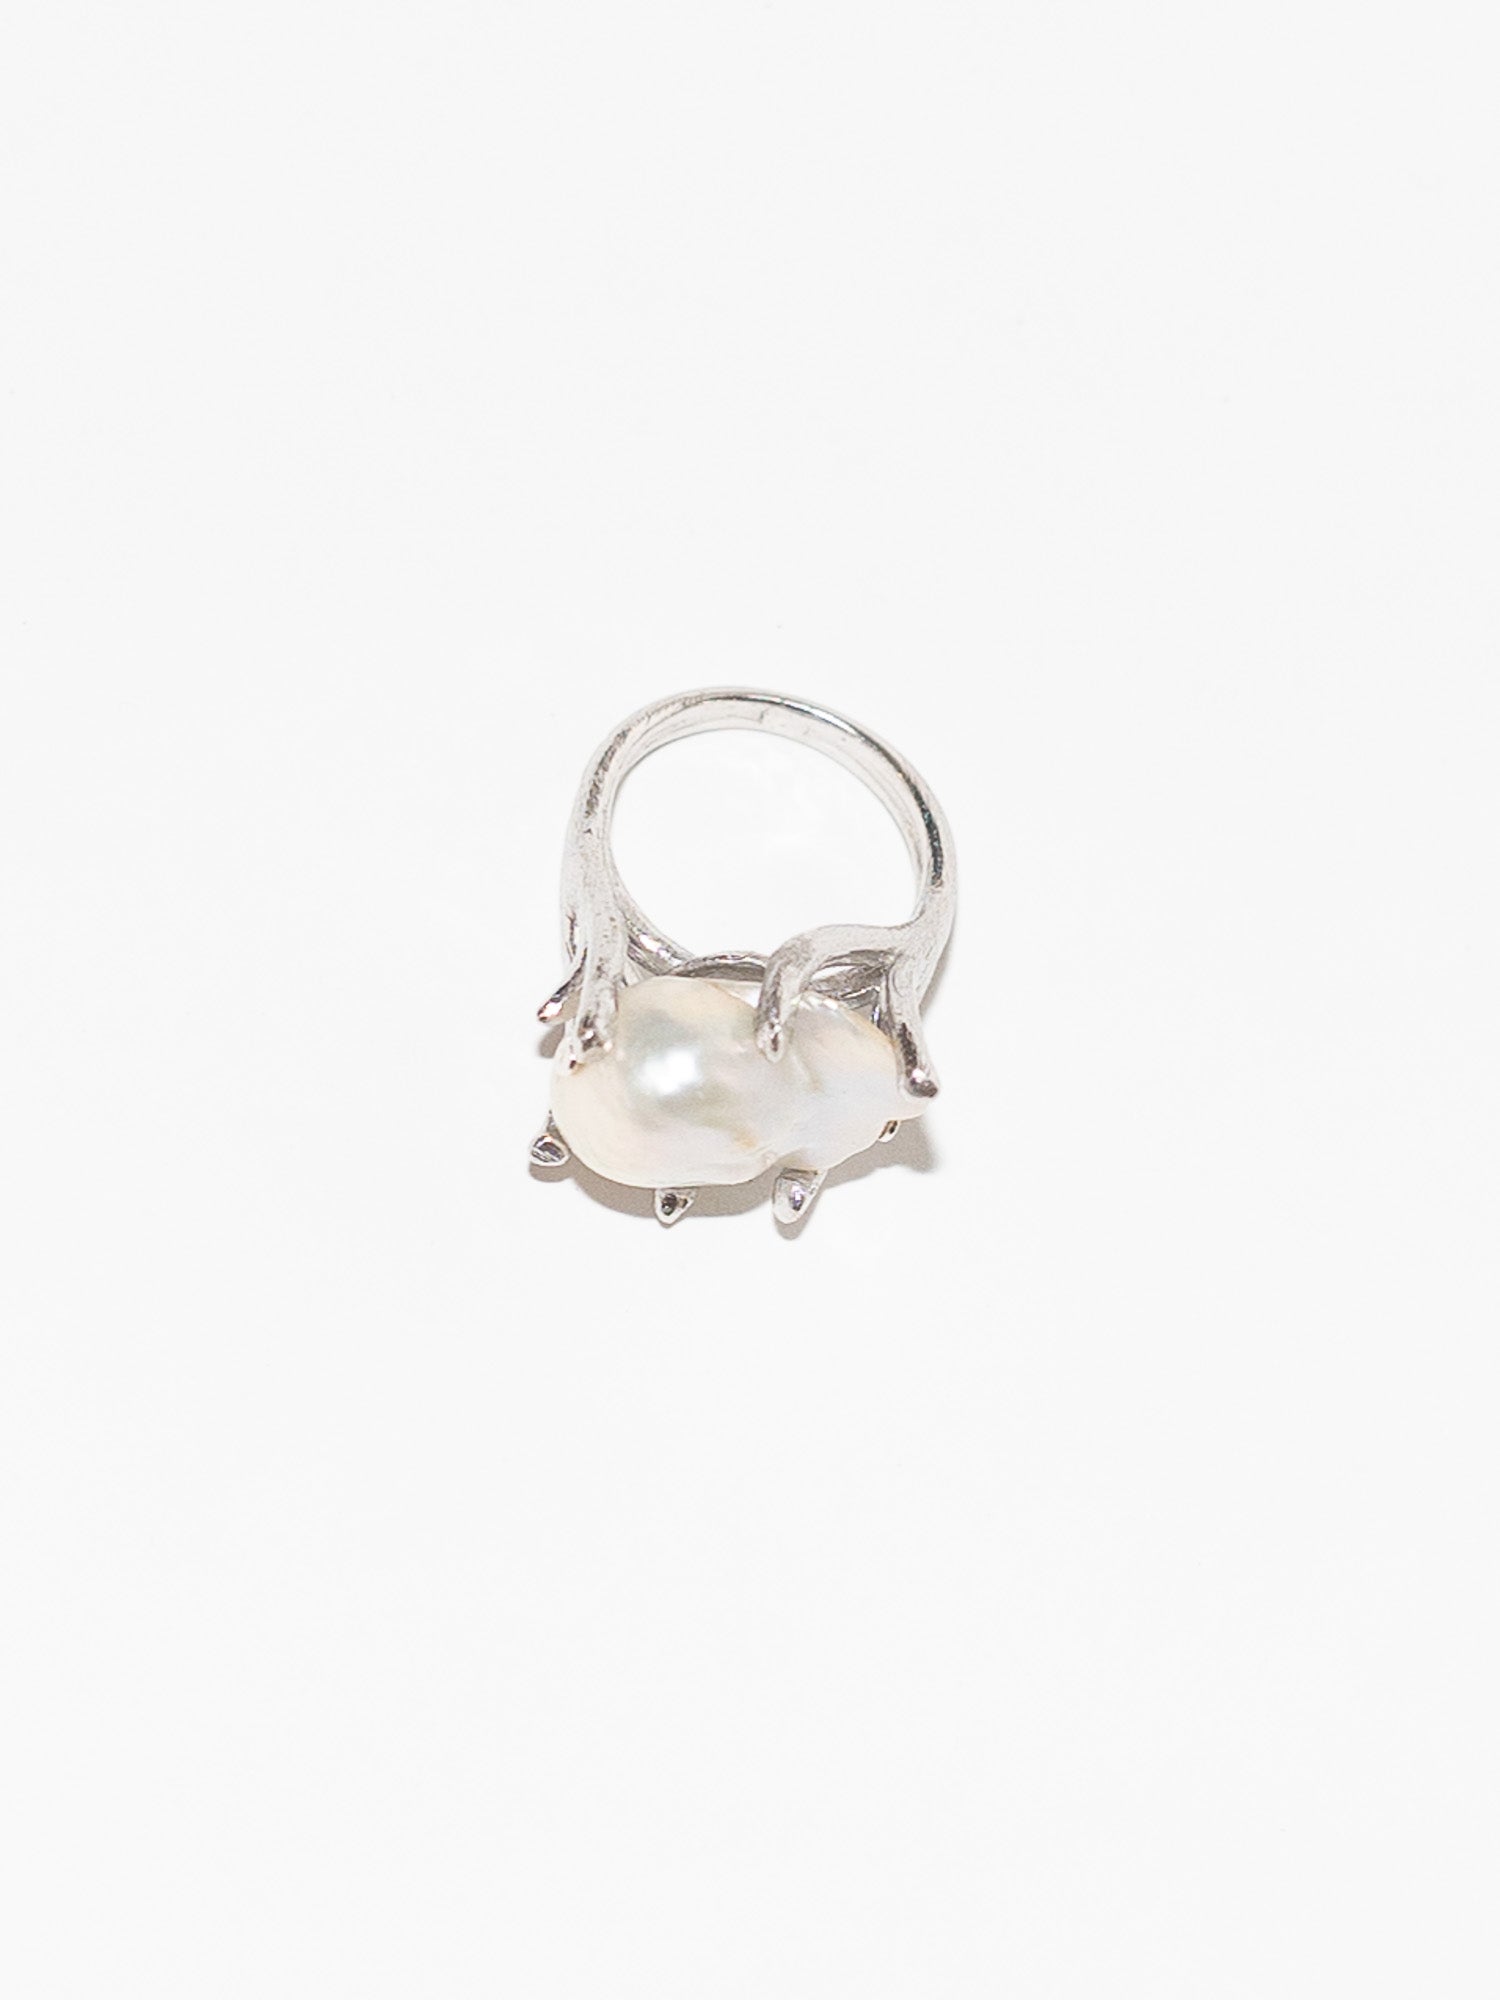 BAROQUE PEARL AND SILVER RING